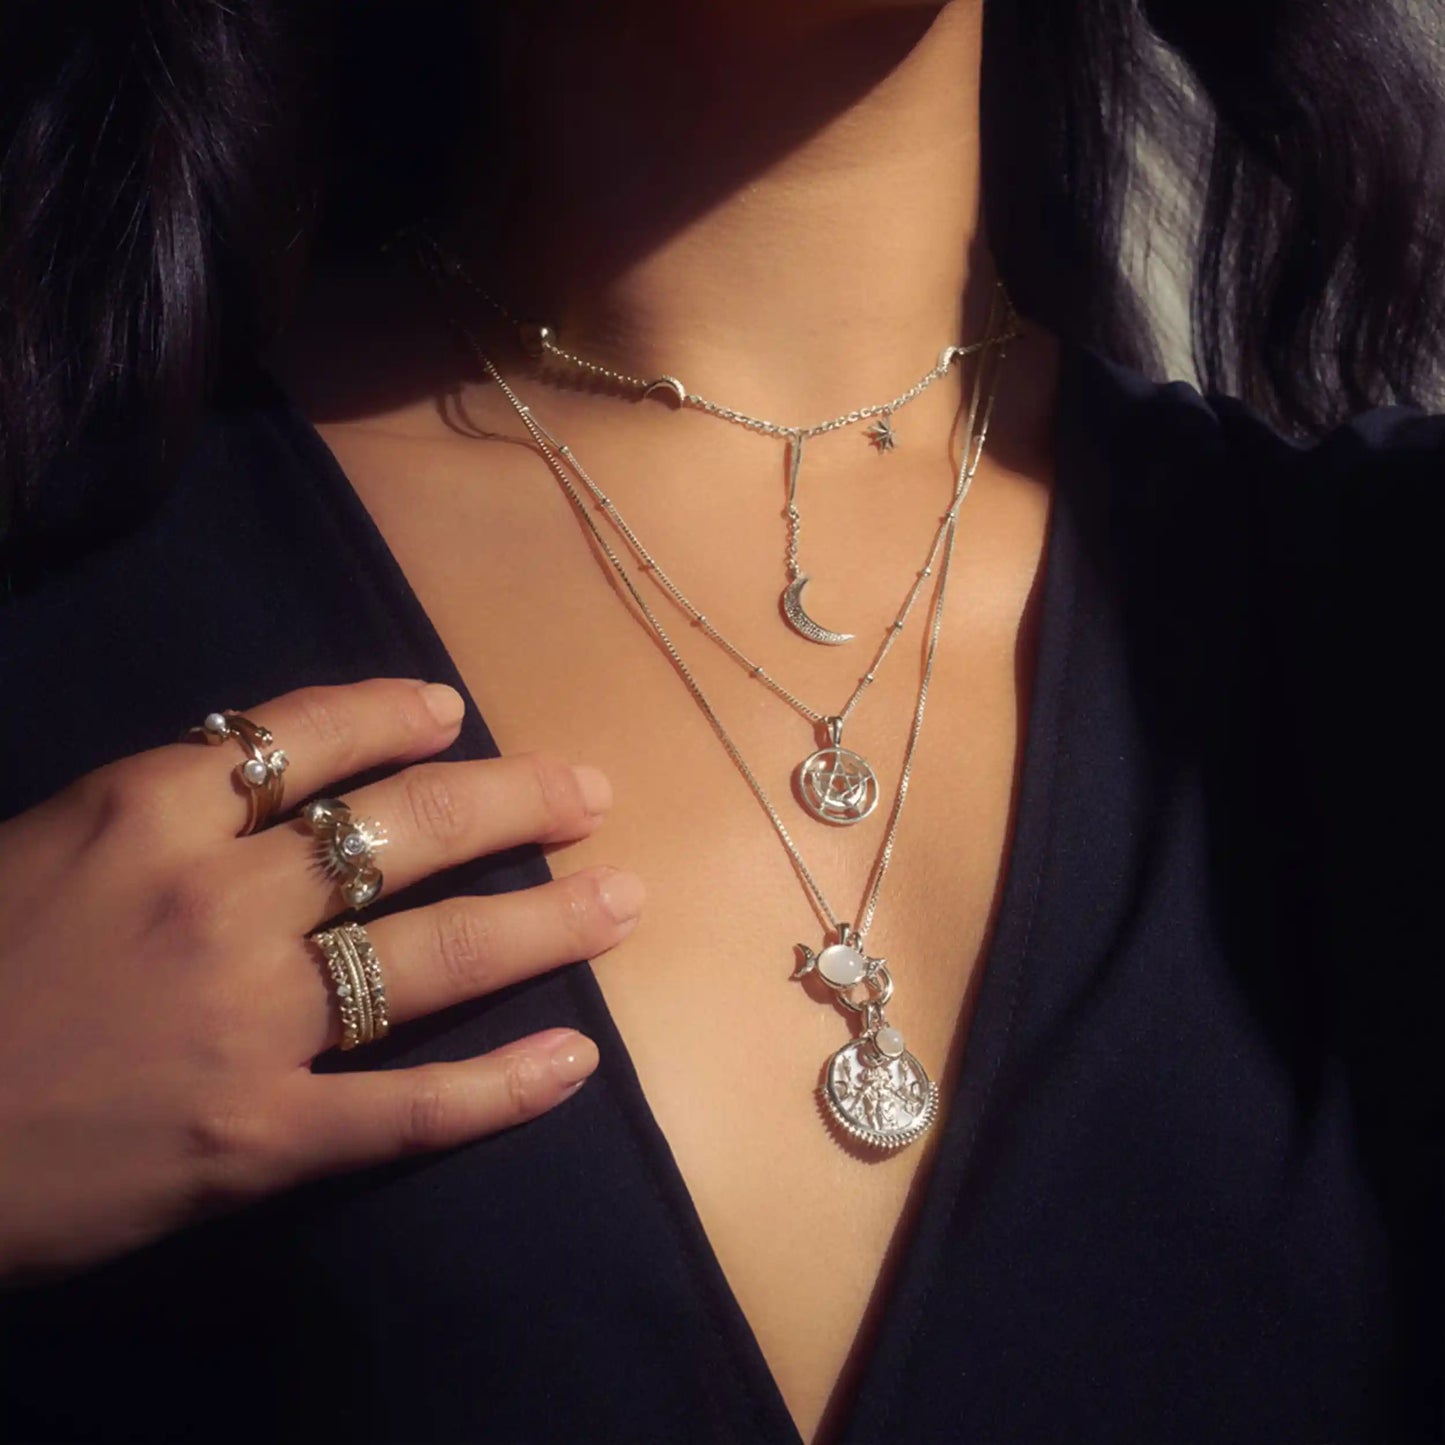 Special Edition Hecate Necklace by Awe Inspired